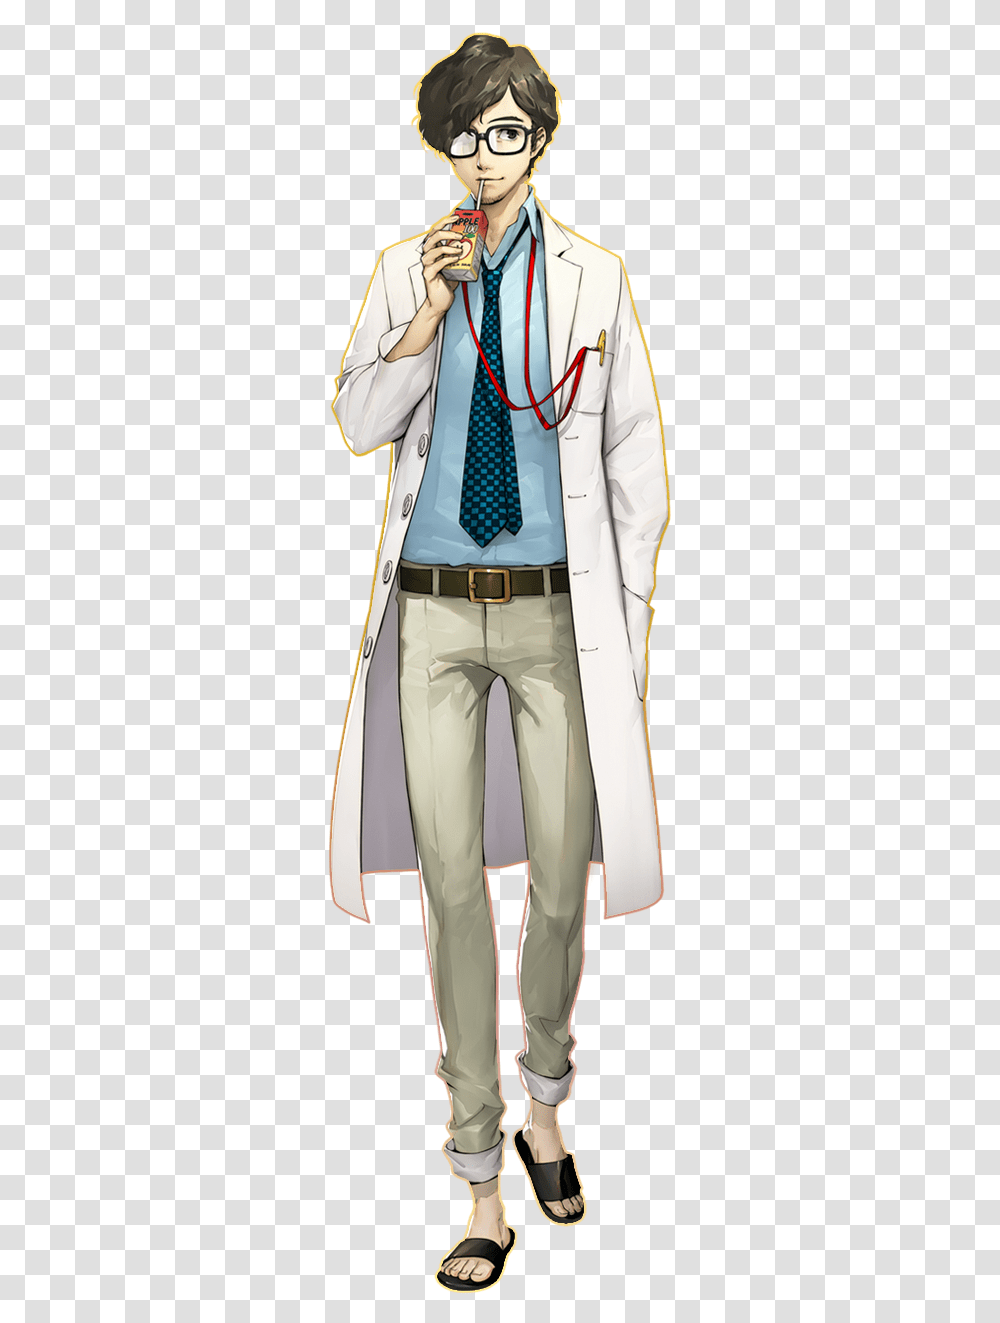 Https Static Tvtropes 5 Royal Takuto 5 Persona 5 Royal Counselor, Tie, Accessories, Shirt Transparent Png